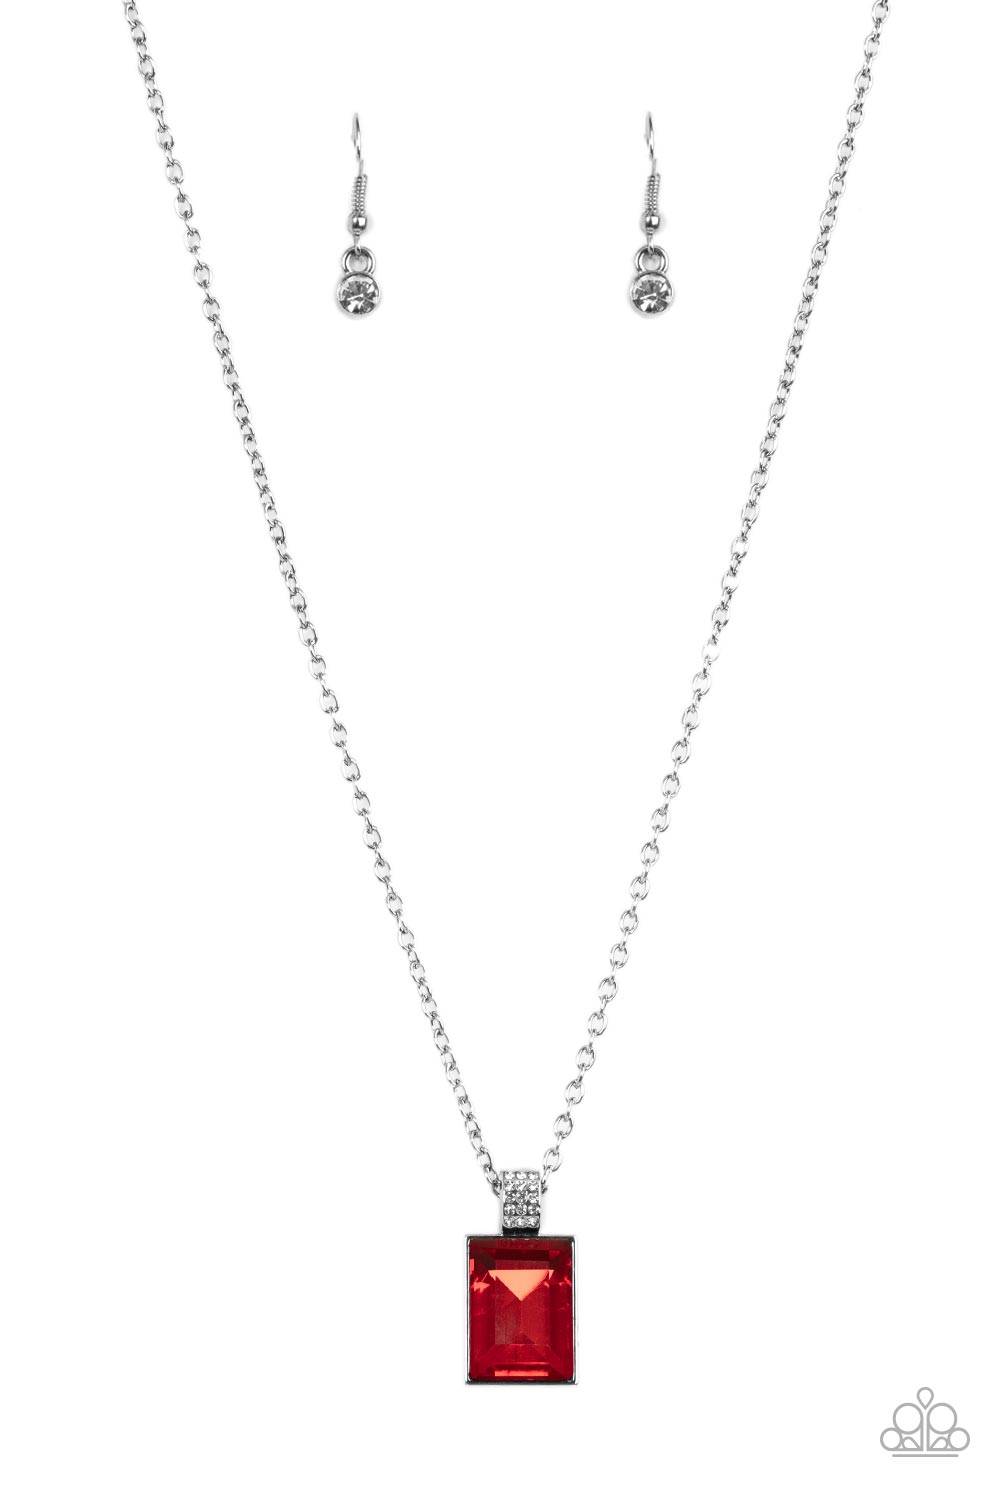 Paparazzi Necklaces - Understated Dazzle - Red